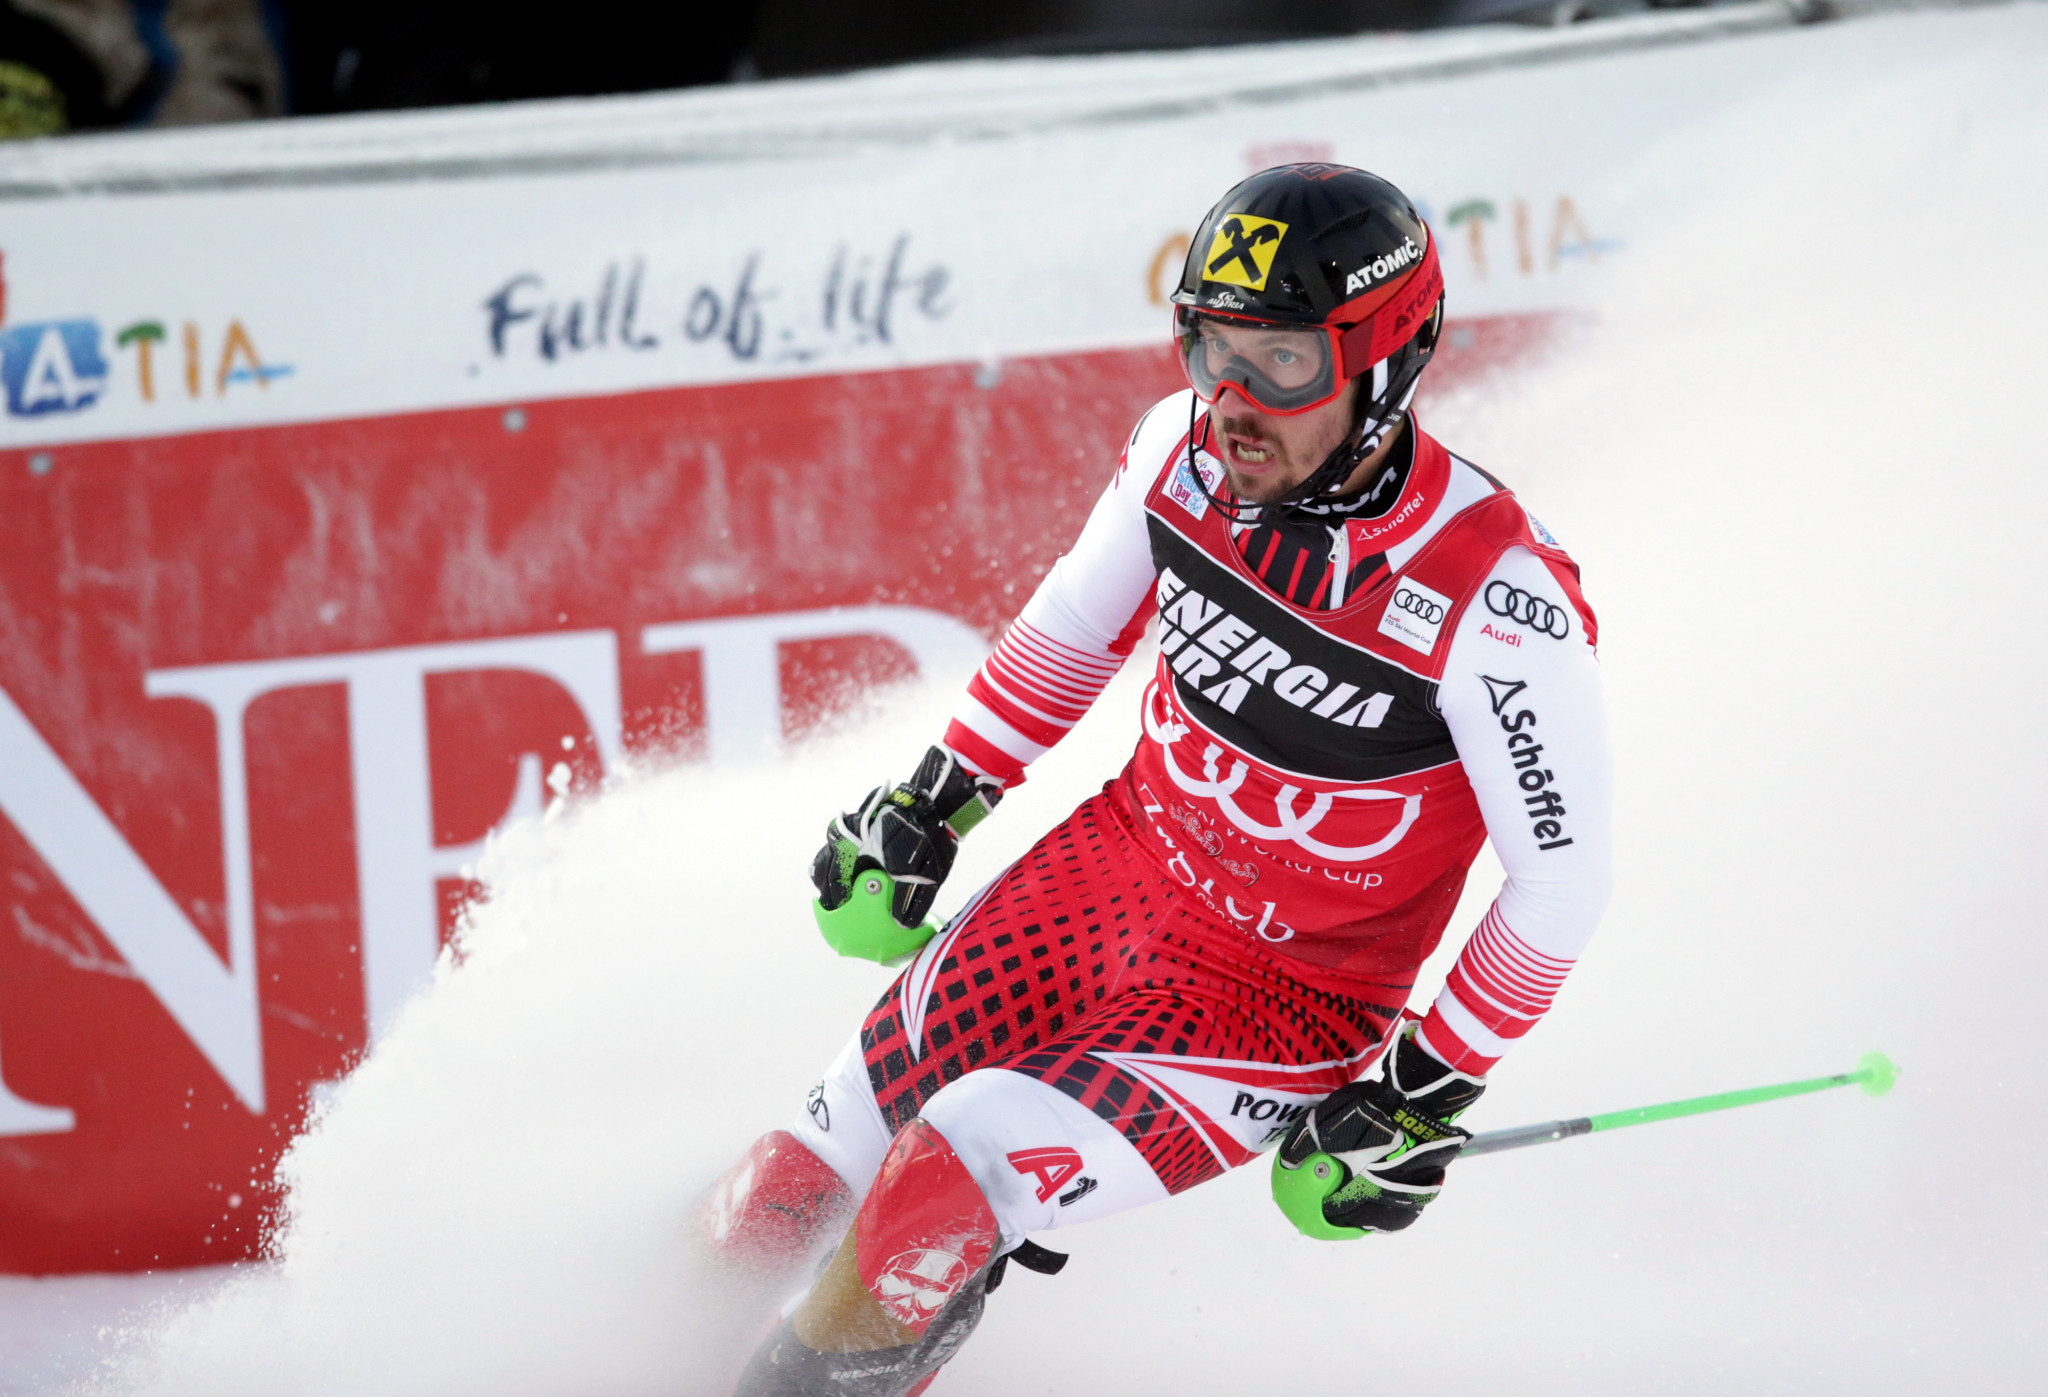 Hirscher out to extend FIS Alpine Skiing World Cup lead in Adelboden